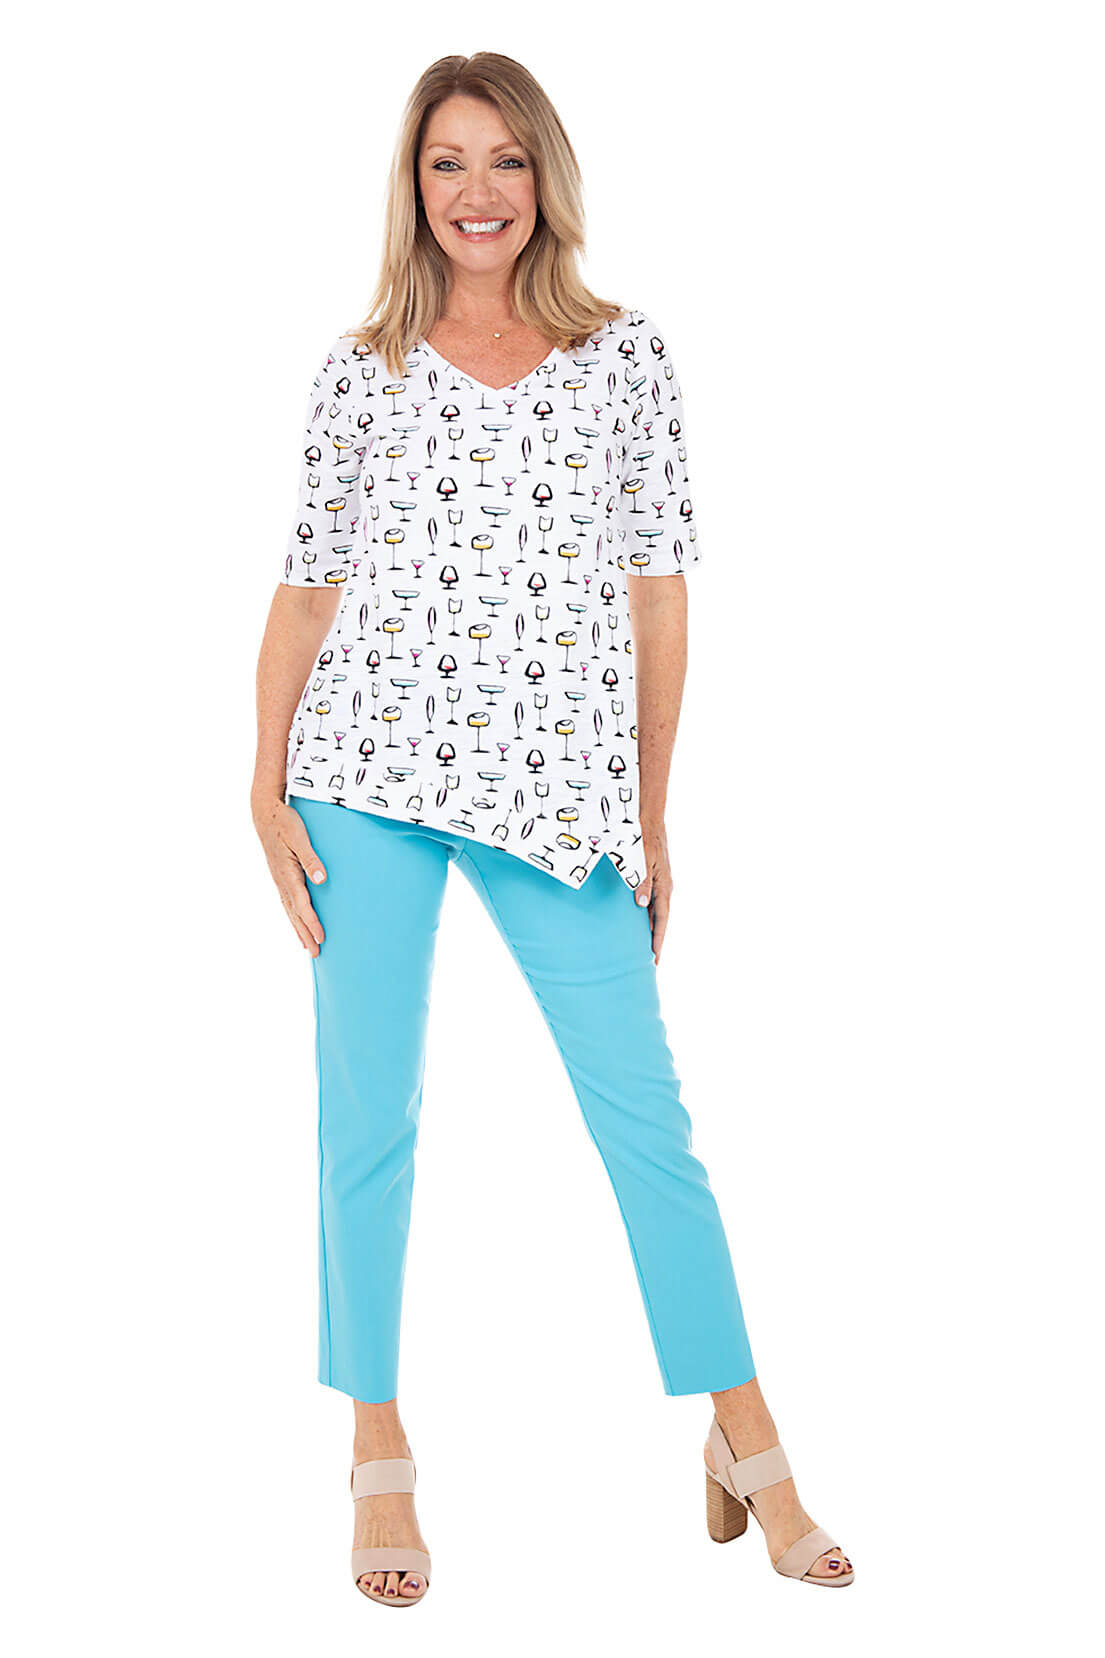 KRAZY LARRY Pull-On Ankle Pant